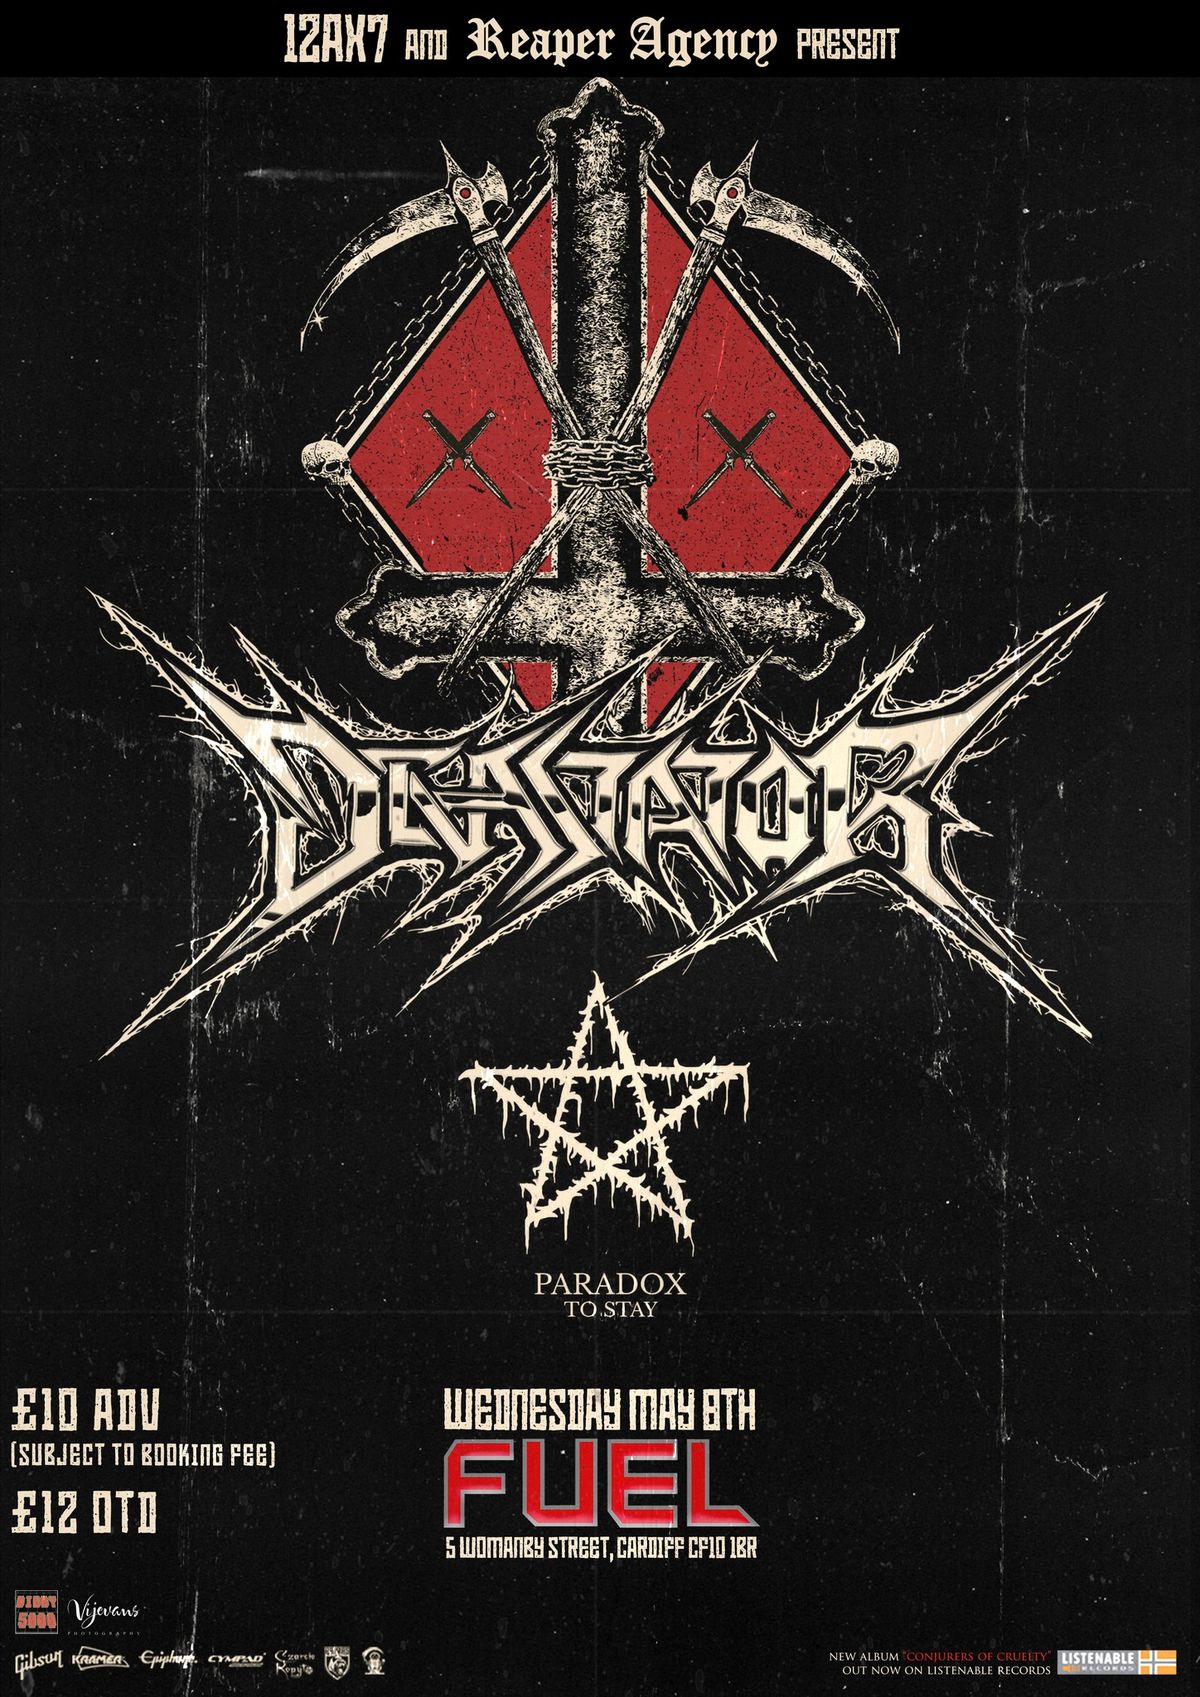 Devastator and Paradox To Stay at Fuel Rock Club